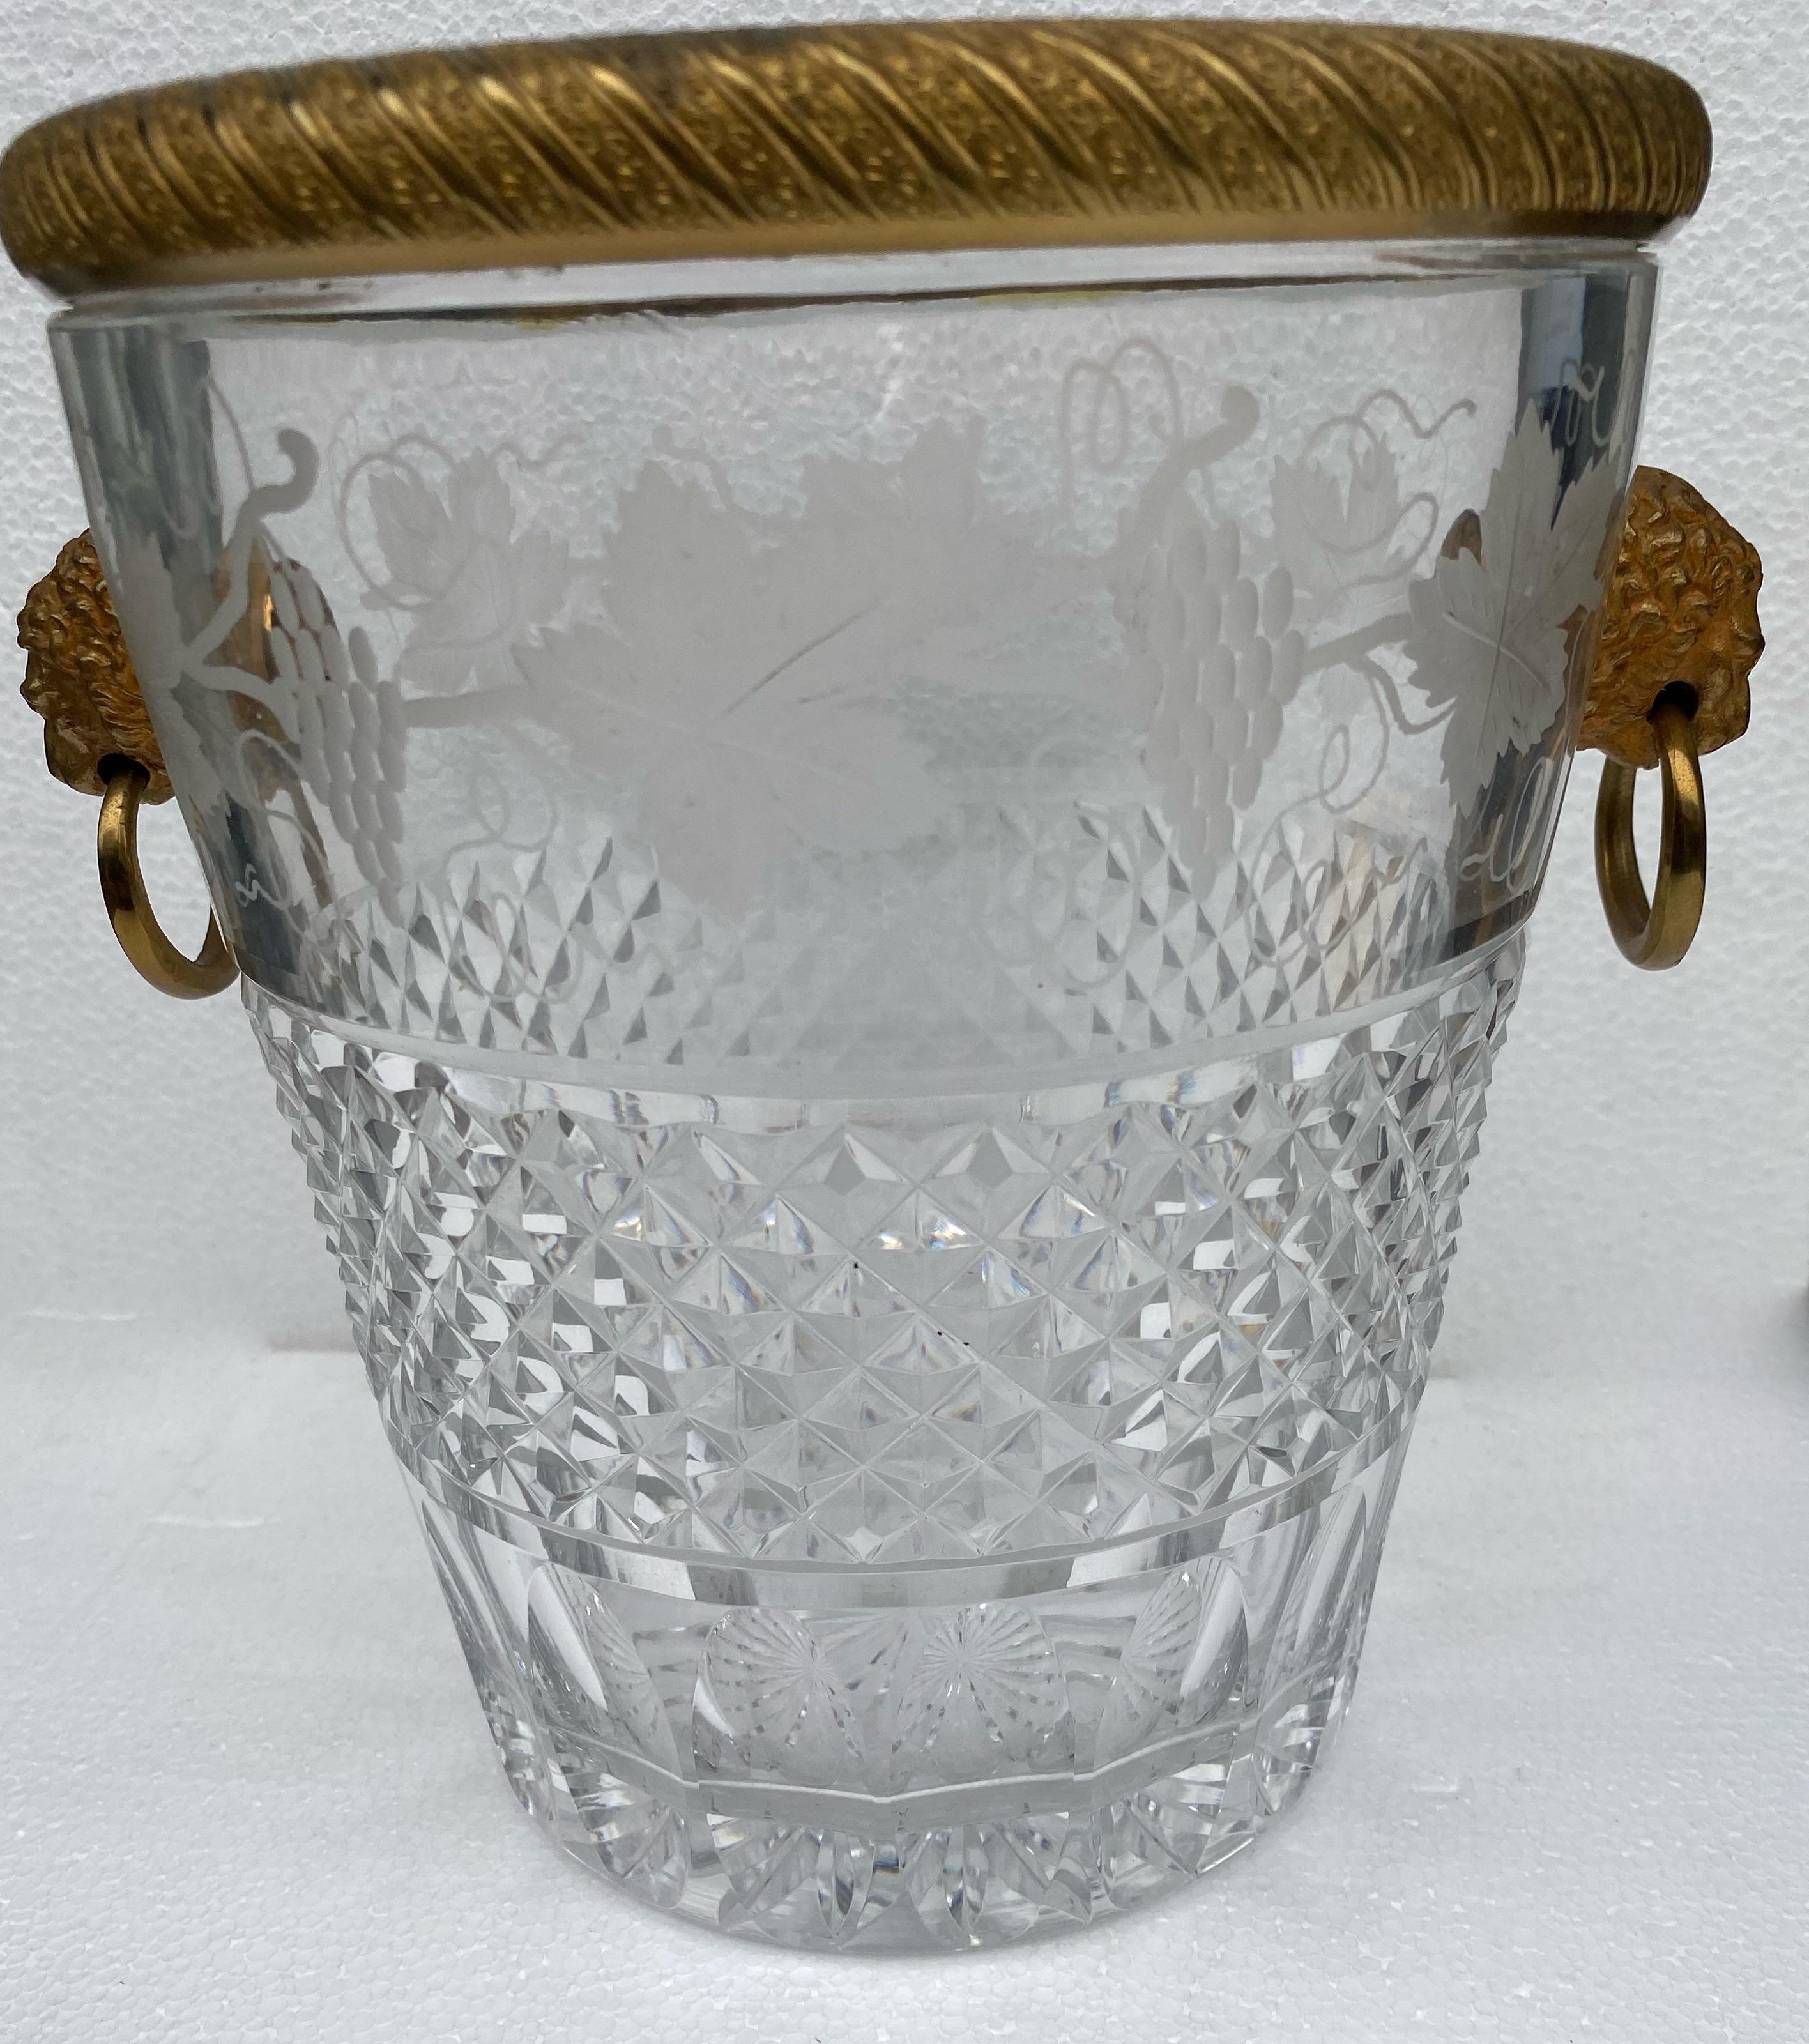 Champagne bucket in diamond point crystal and guilloché gilt bronze, St Louis.
The upper part is decorated with engravings with the attributes of the vine
Good condition,
Height: 24 cm
Diameter: 26 cm
Diameter of the vase without decoration: 20